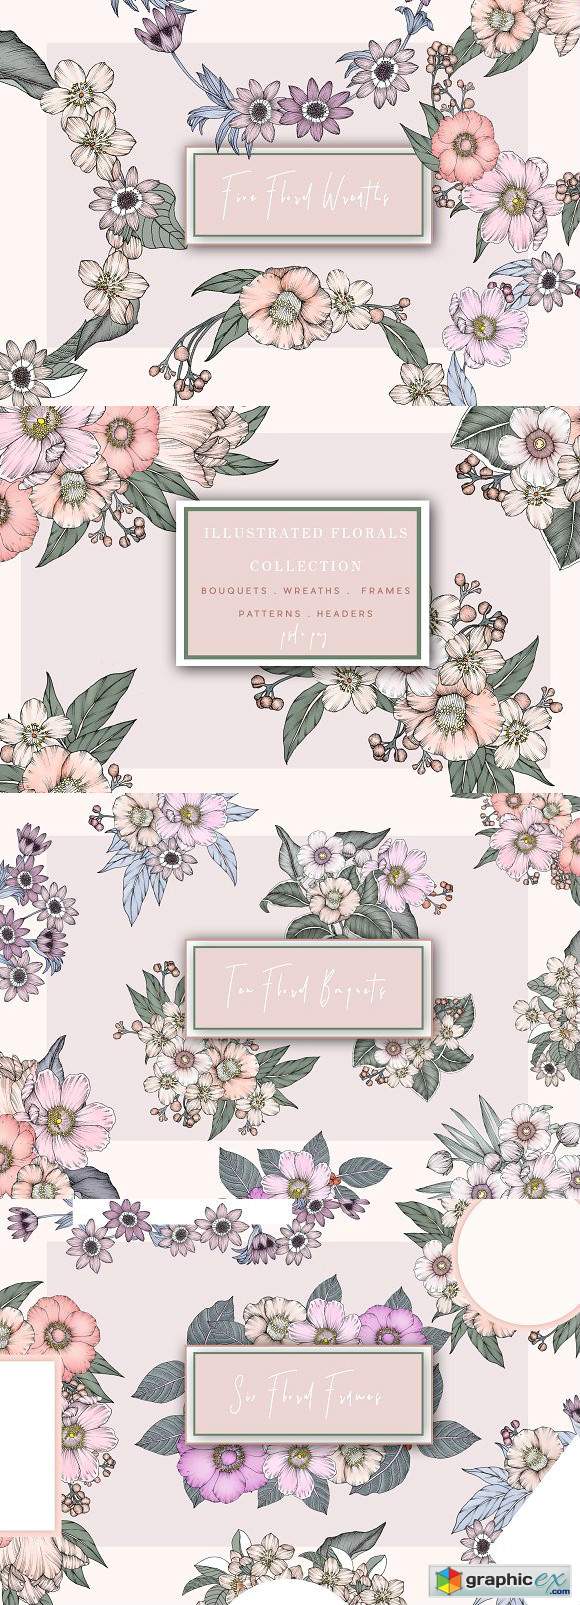 Illustrated Floral Collection